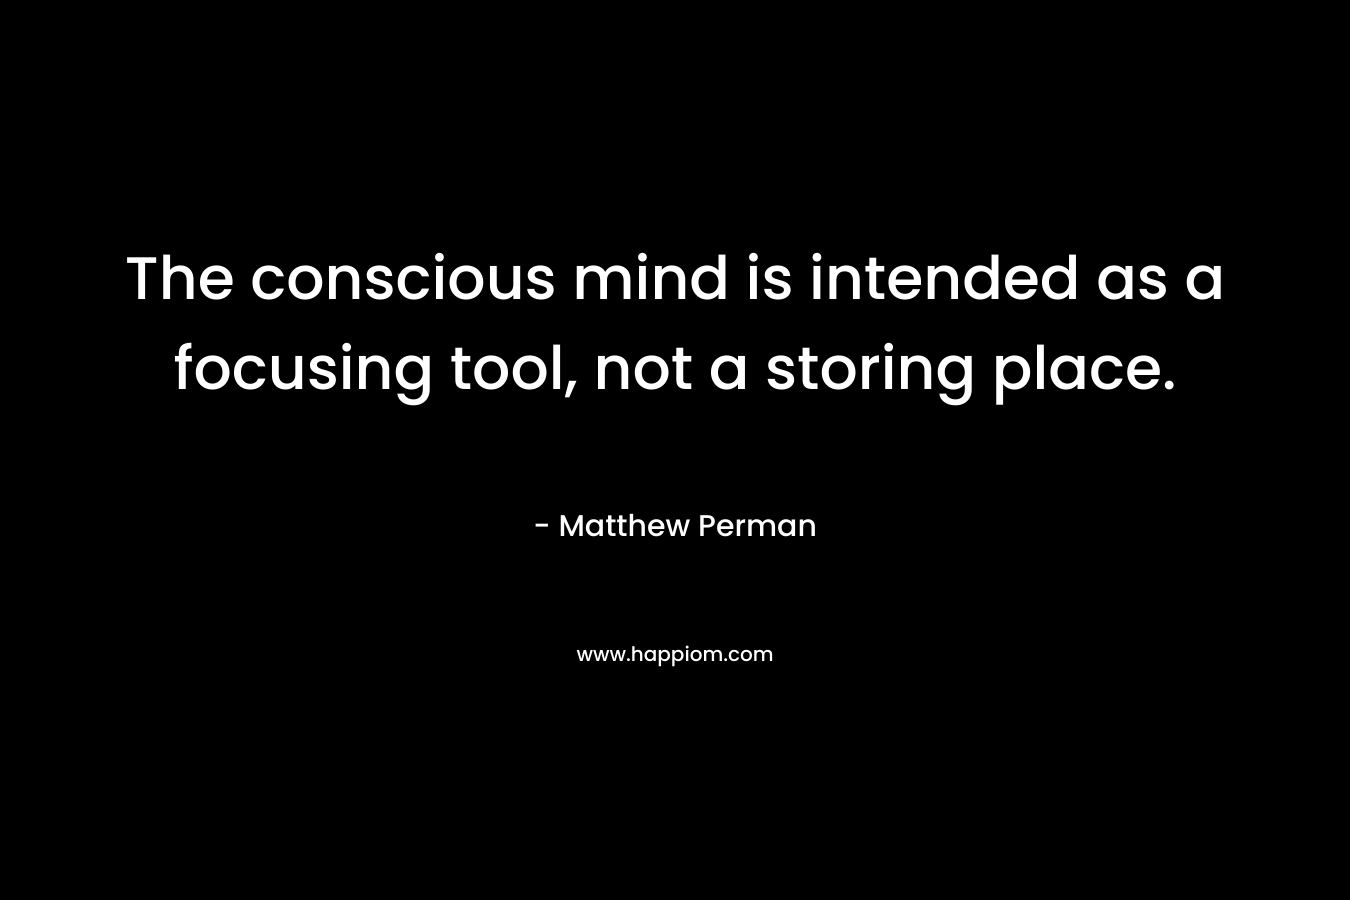 The conscious mind is intended as a focusing tool, not a storing place. – Matthew Perman